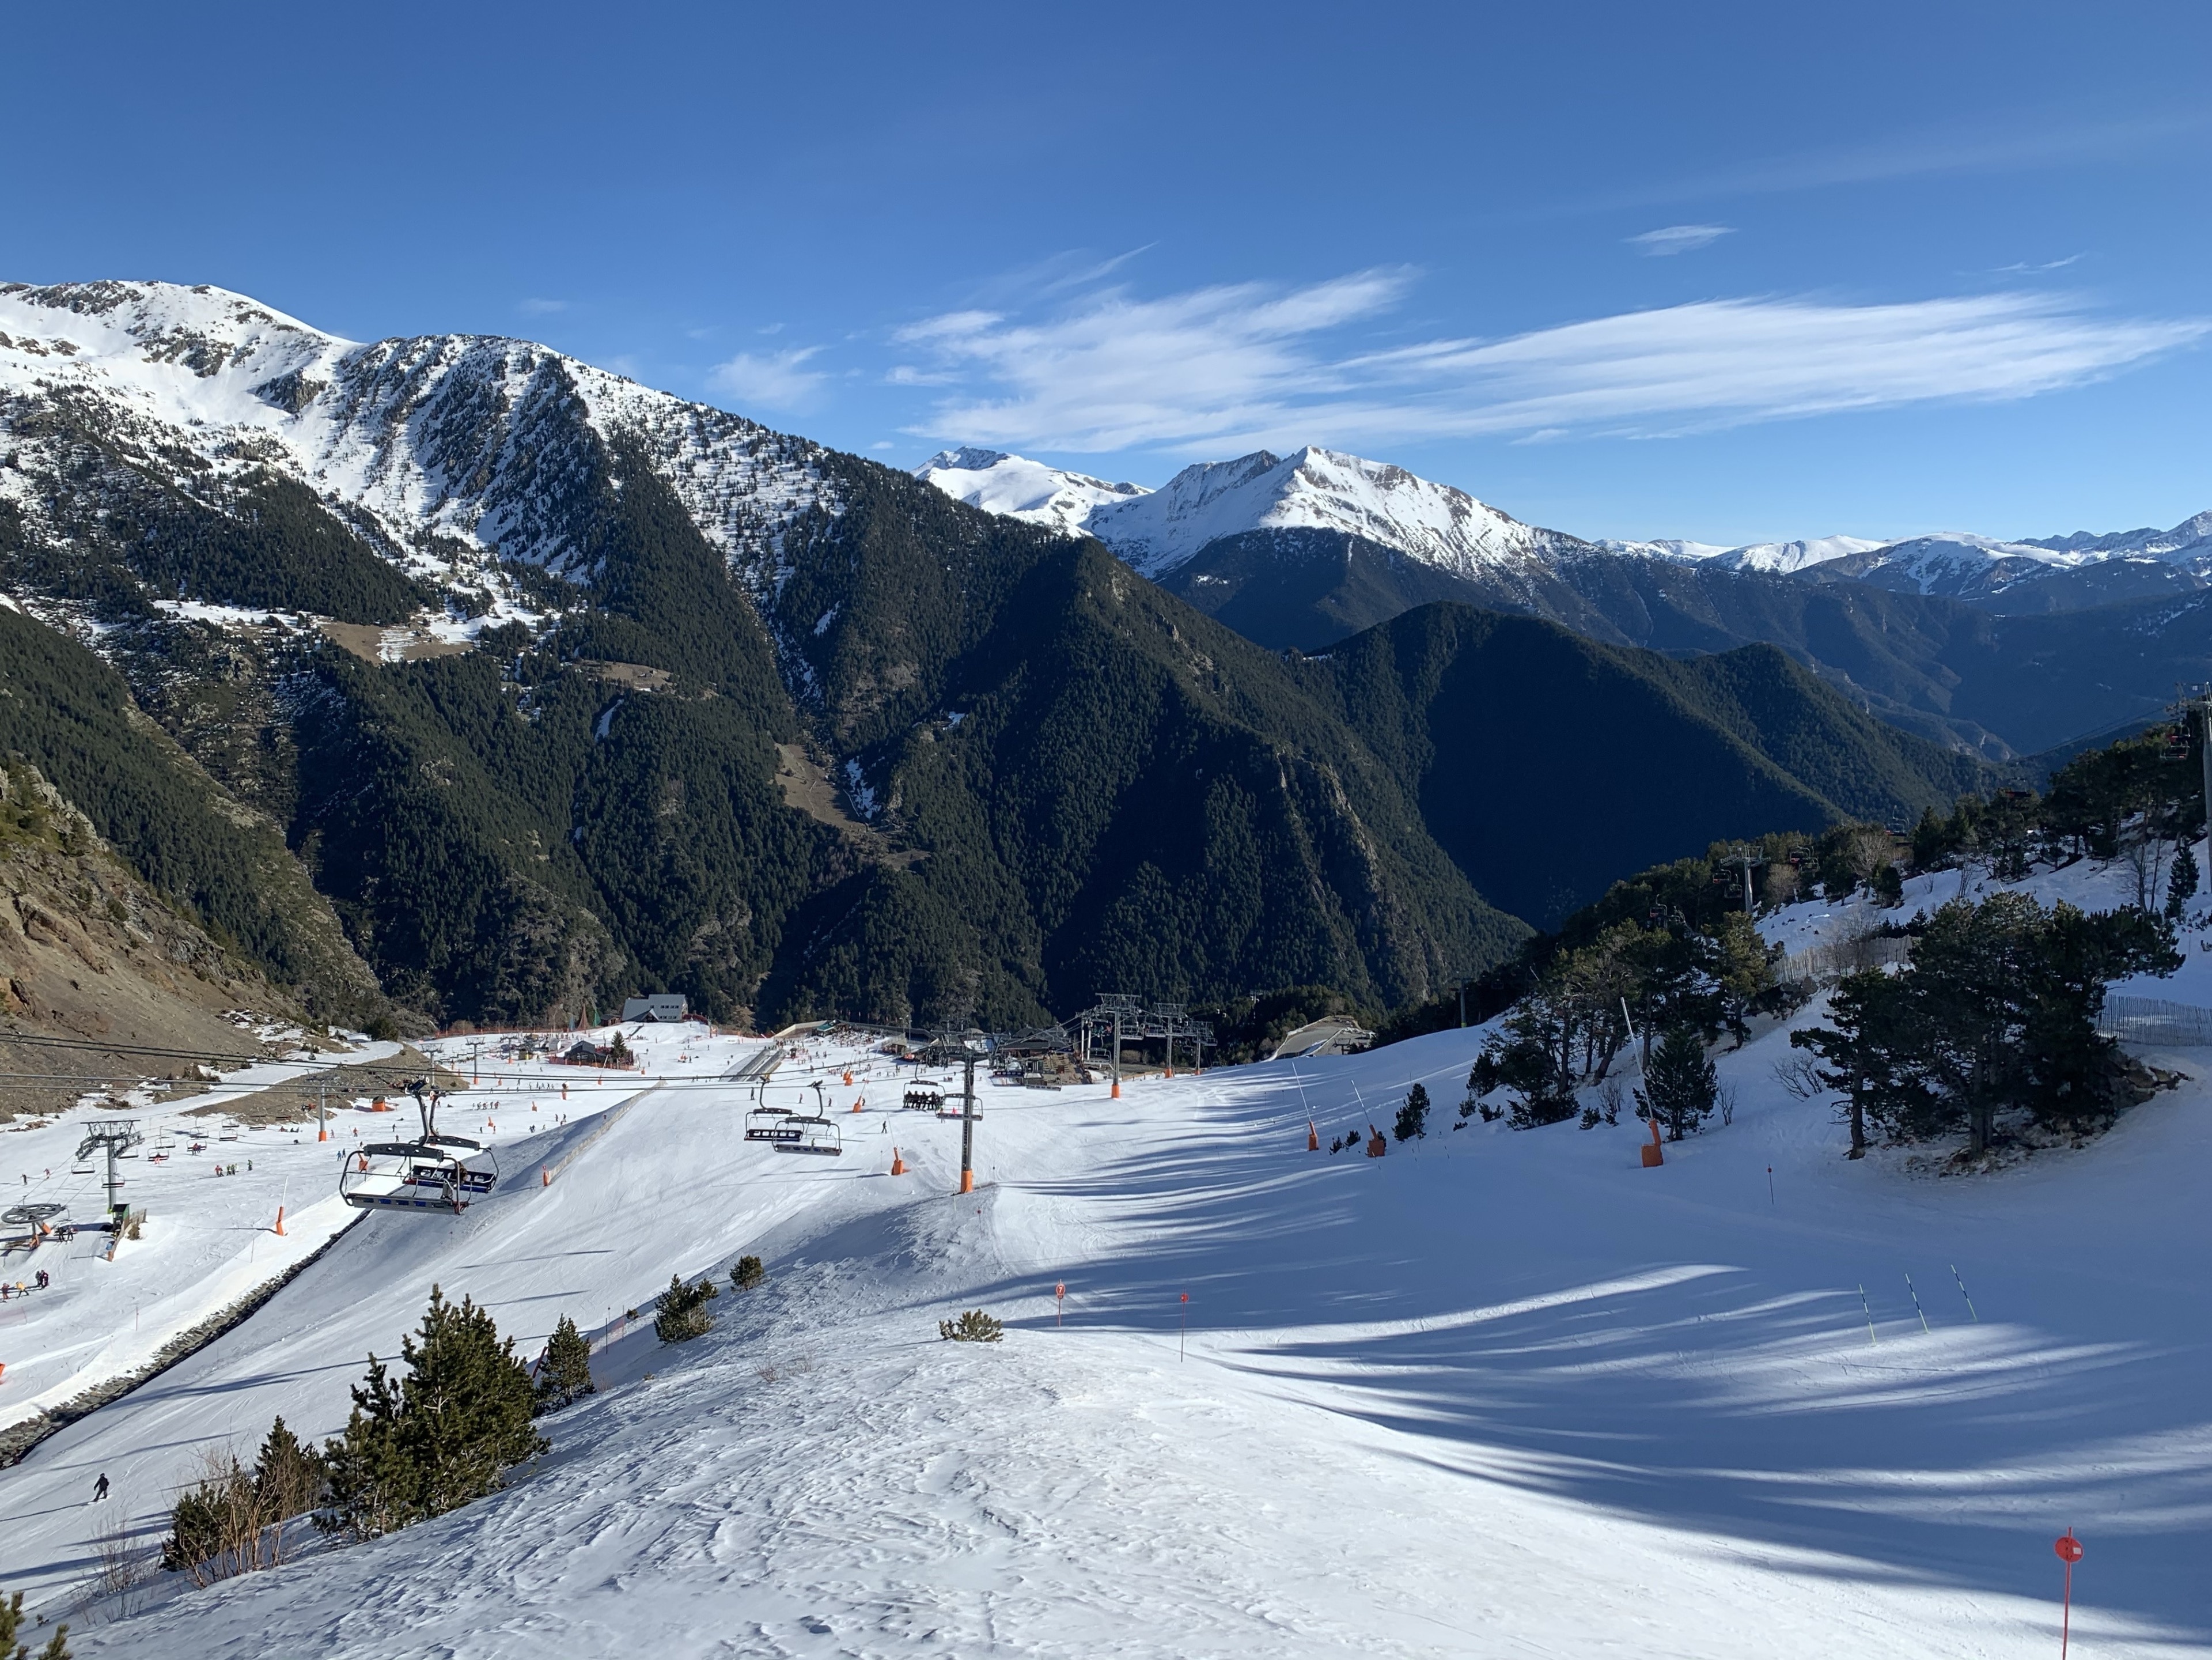 Amazing view from Obelix. Around halfway down the blue run at Arinsal